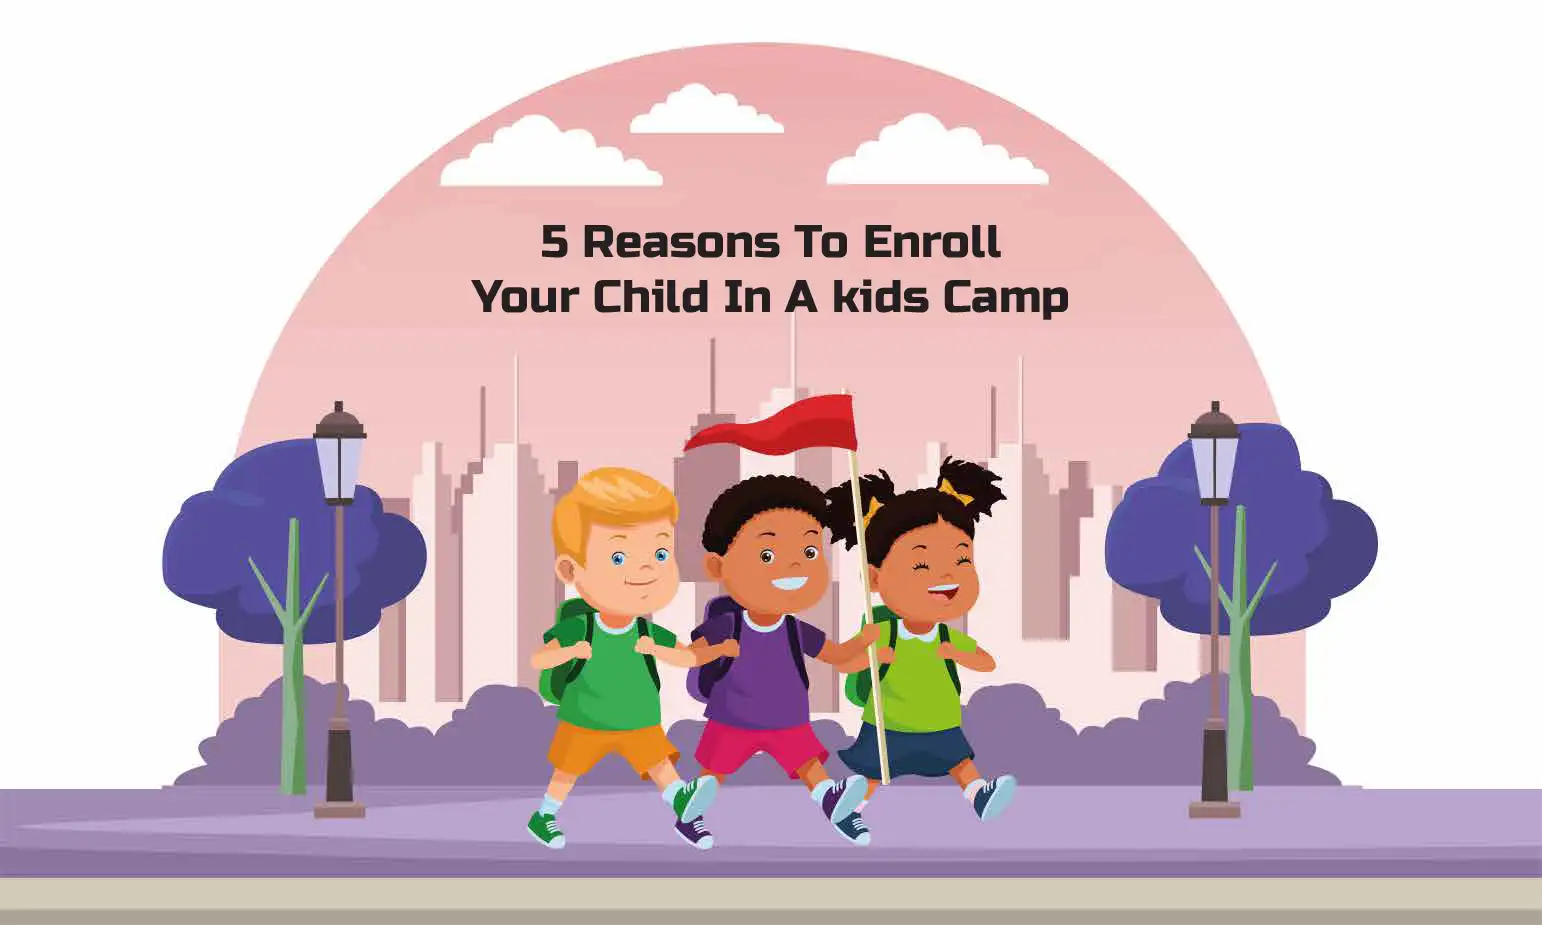 5 Reasons To Enroll Your Child In A Kids Camp